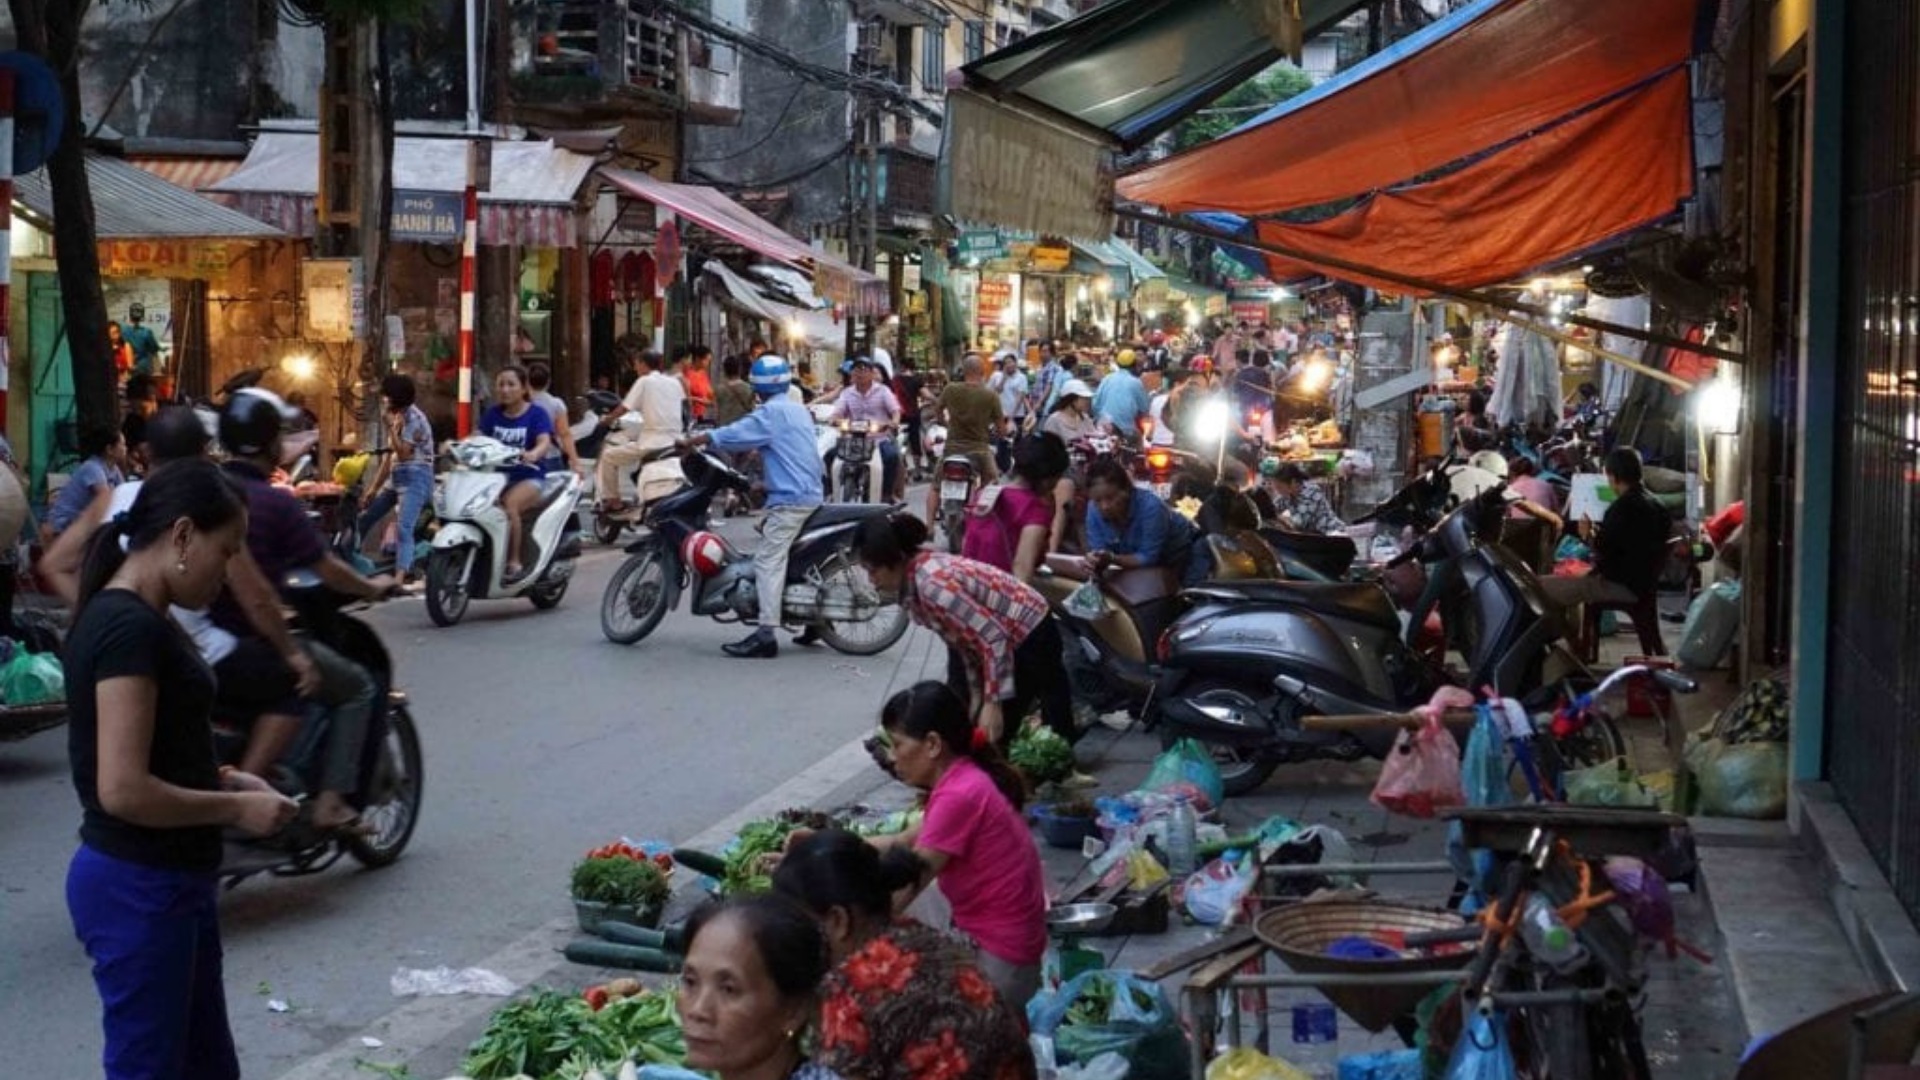 The streets markets in Hanoi full of people and motorbikes